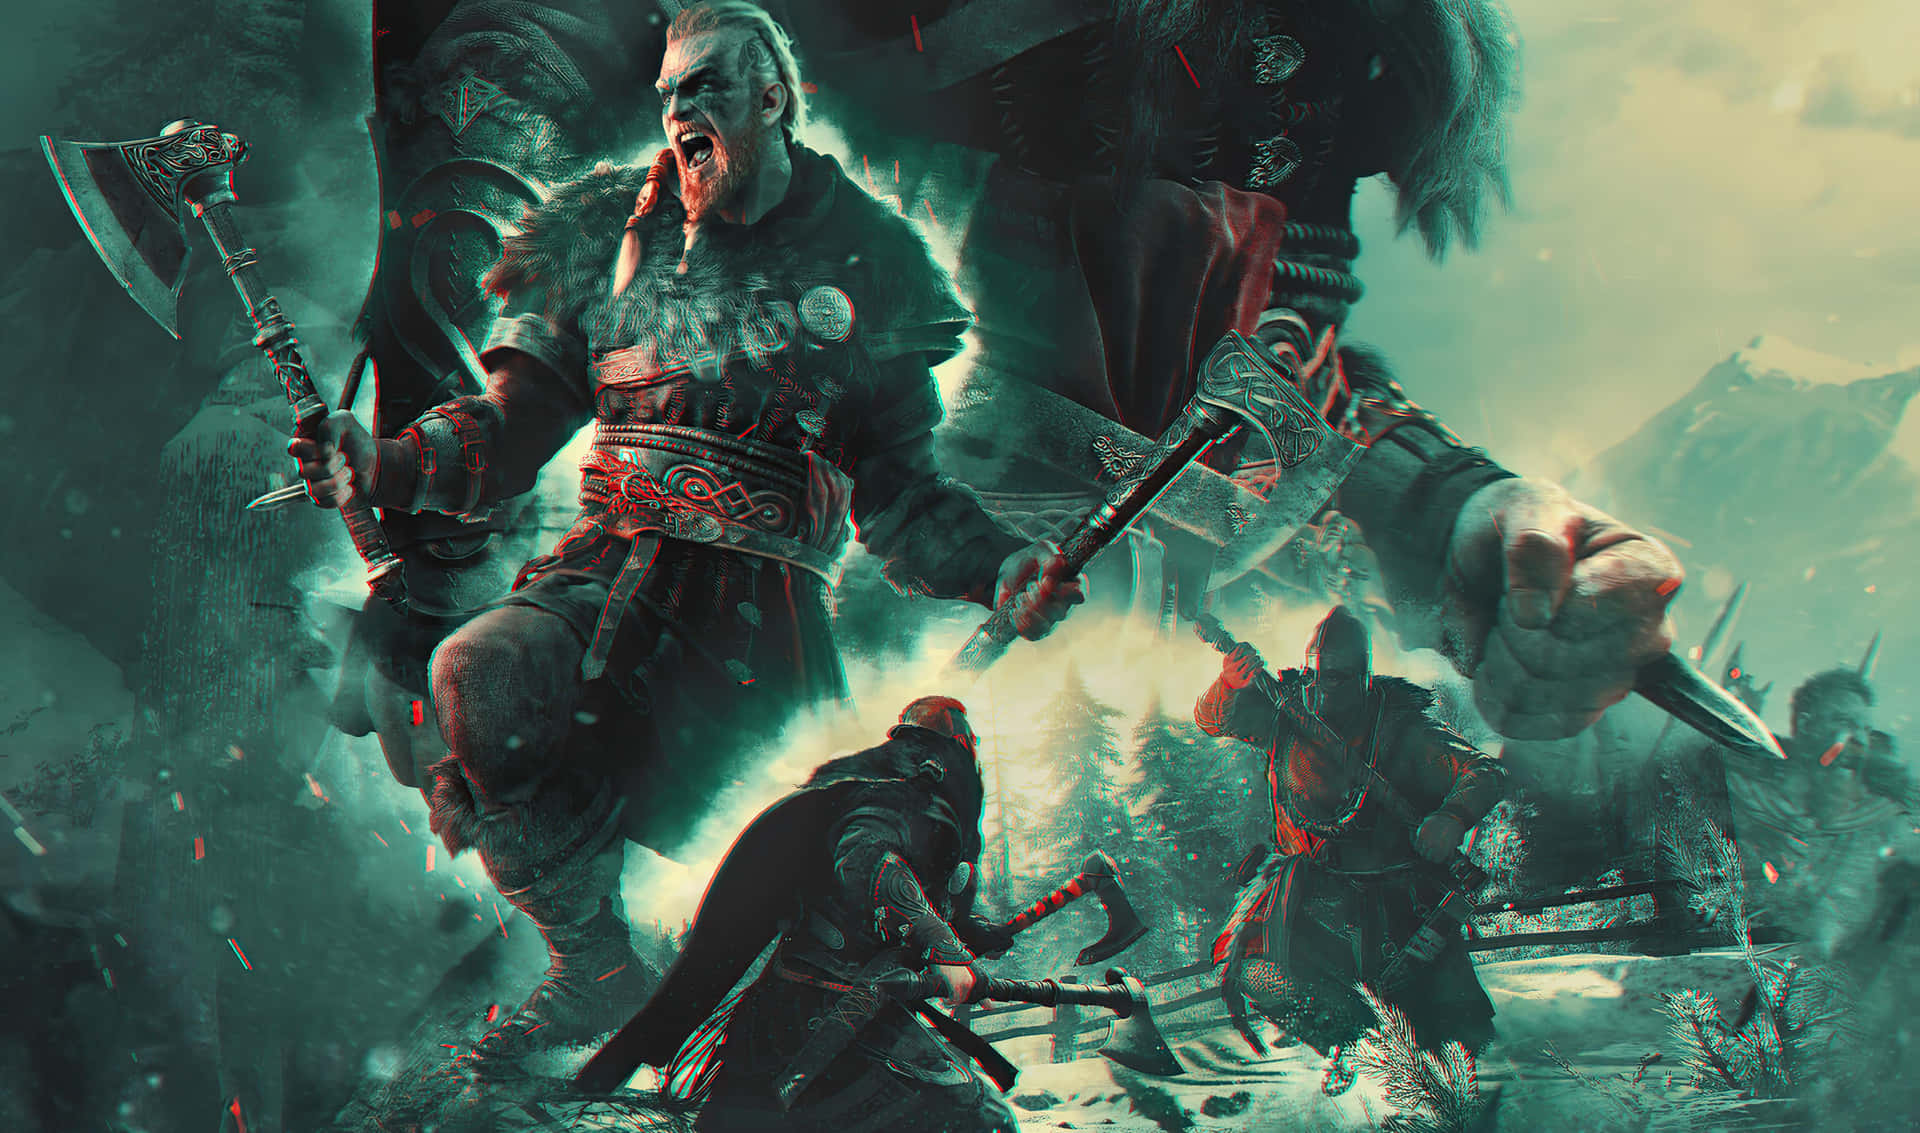 Thewitcher 3 - The Witcher 3 Hd Tapet